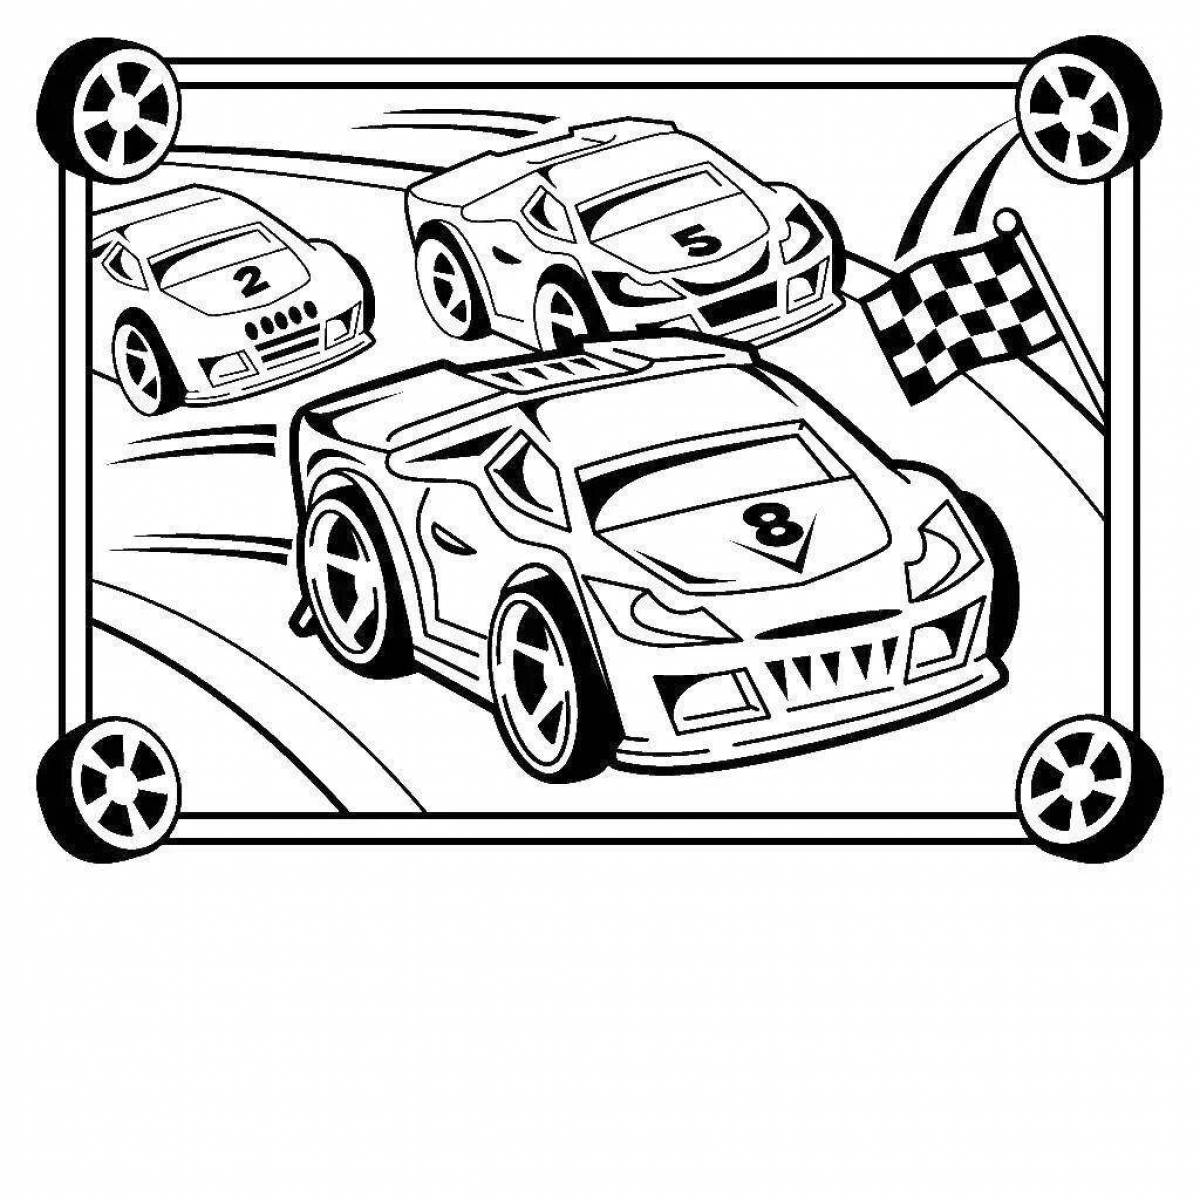 Trendy racing car coloring book for 3-4 year olds